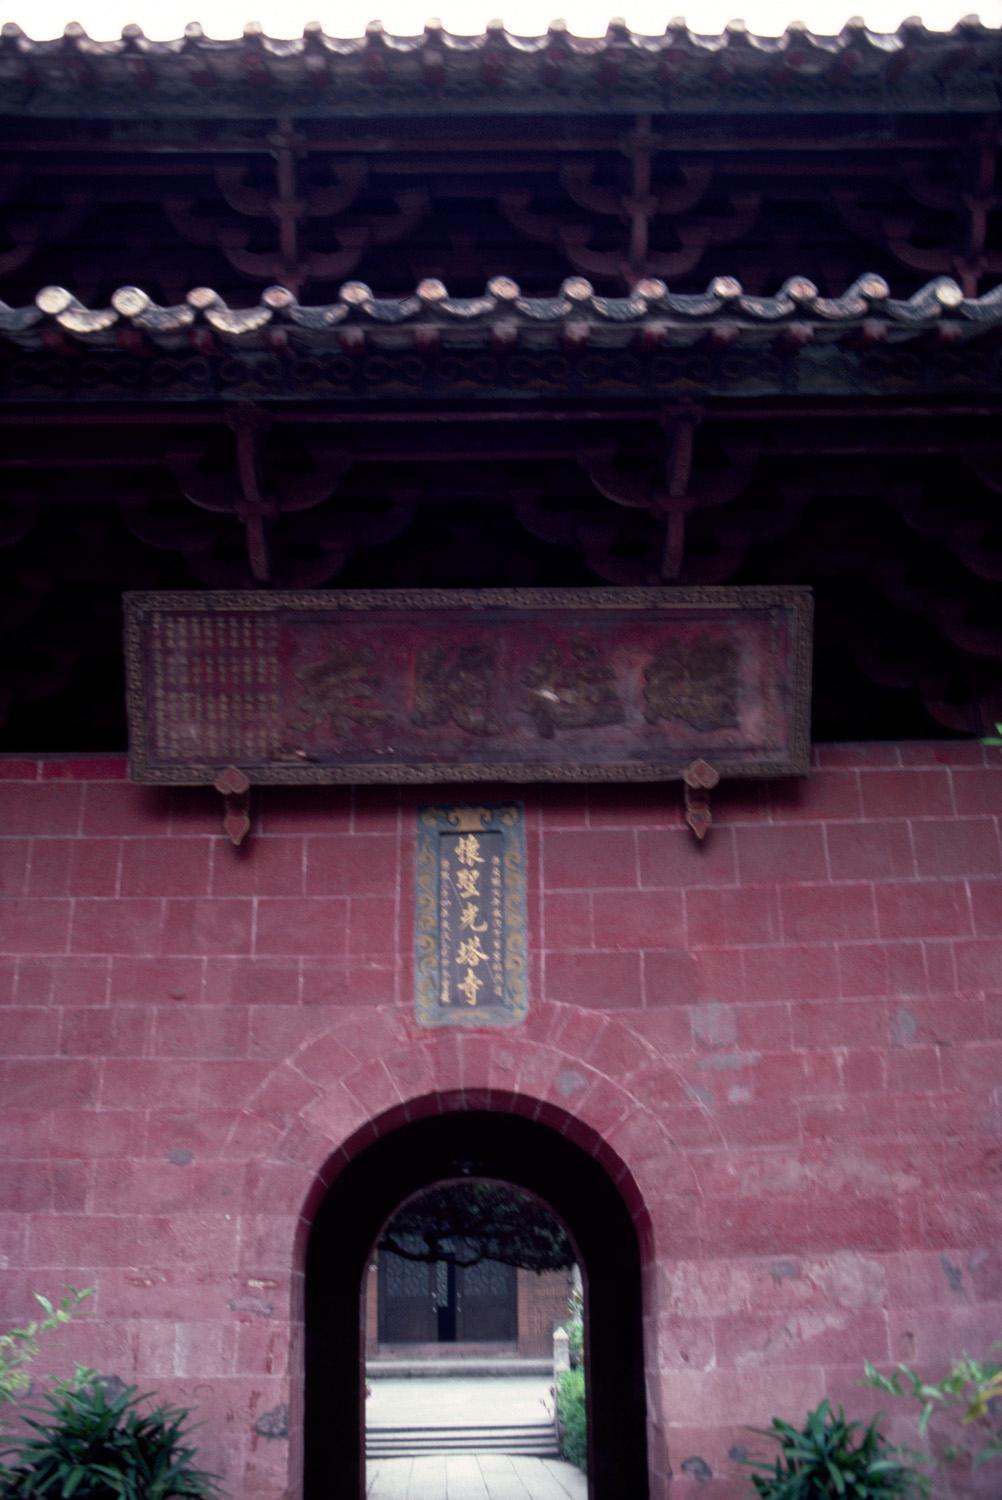 Detail of double eaves, dougong brackets and inscriptive plaque on bangke tower